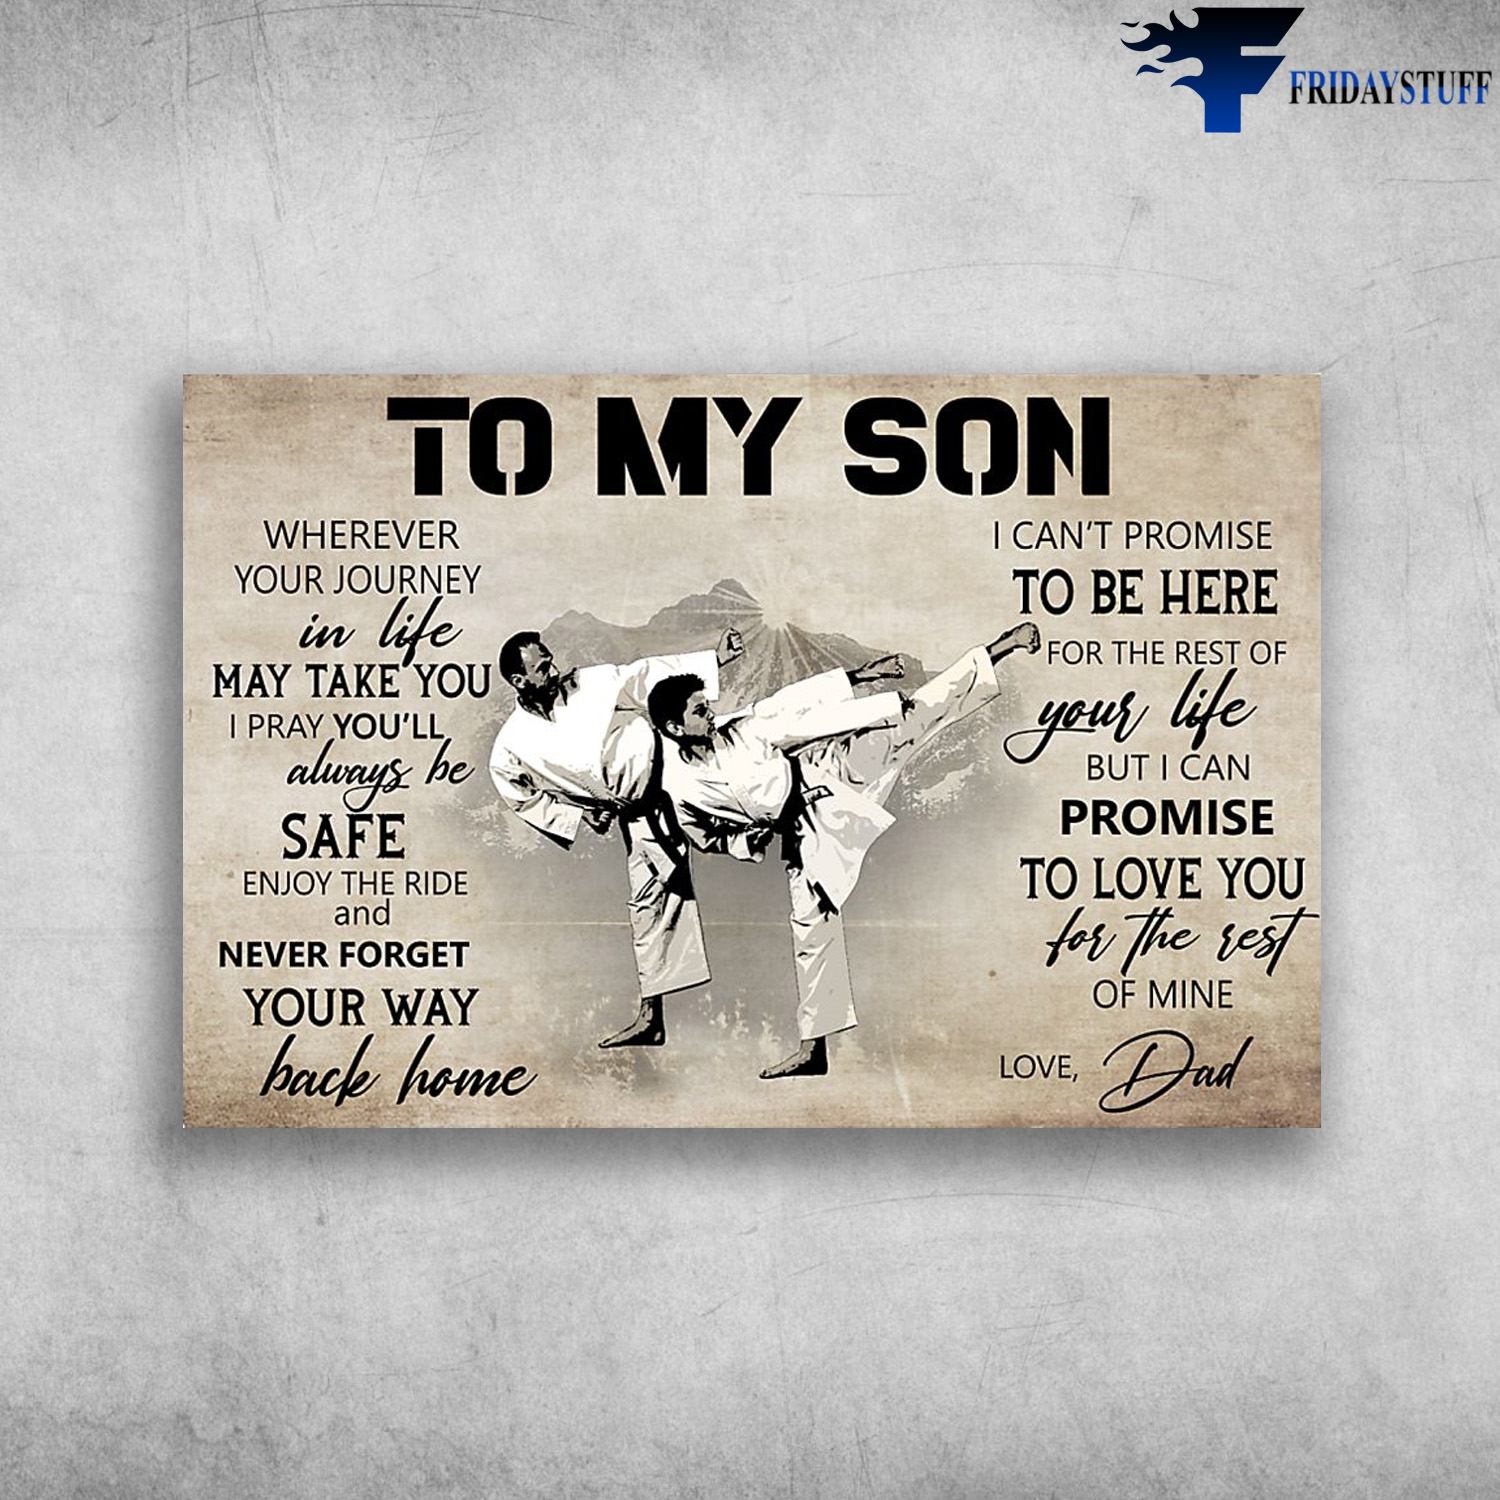 Karate Dad And Son – To My Son, Wherever Your Journey In Life May Take You, I Pray You’ll Always Be Safe, Enjoy The Ride And Never Forget Your Way Back Home, I Can’t Promise To Be Here For The Rest Of Your Life